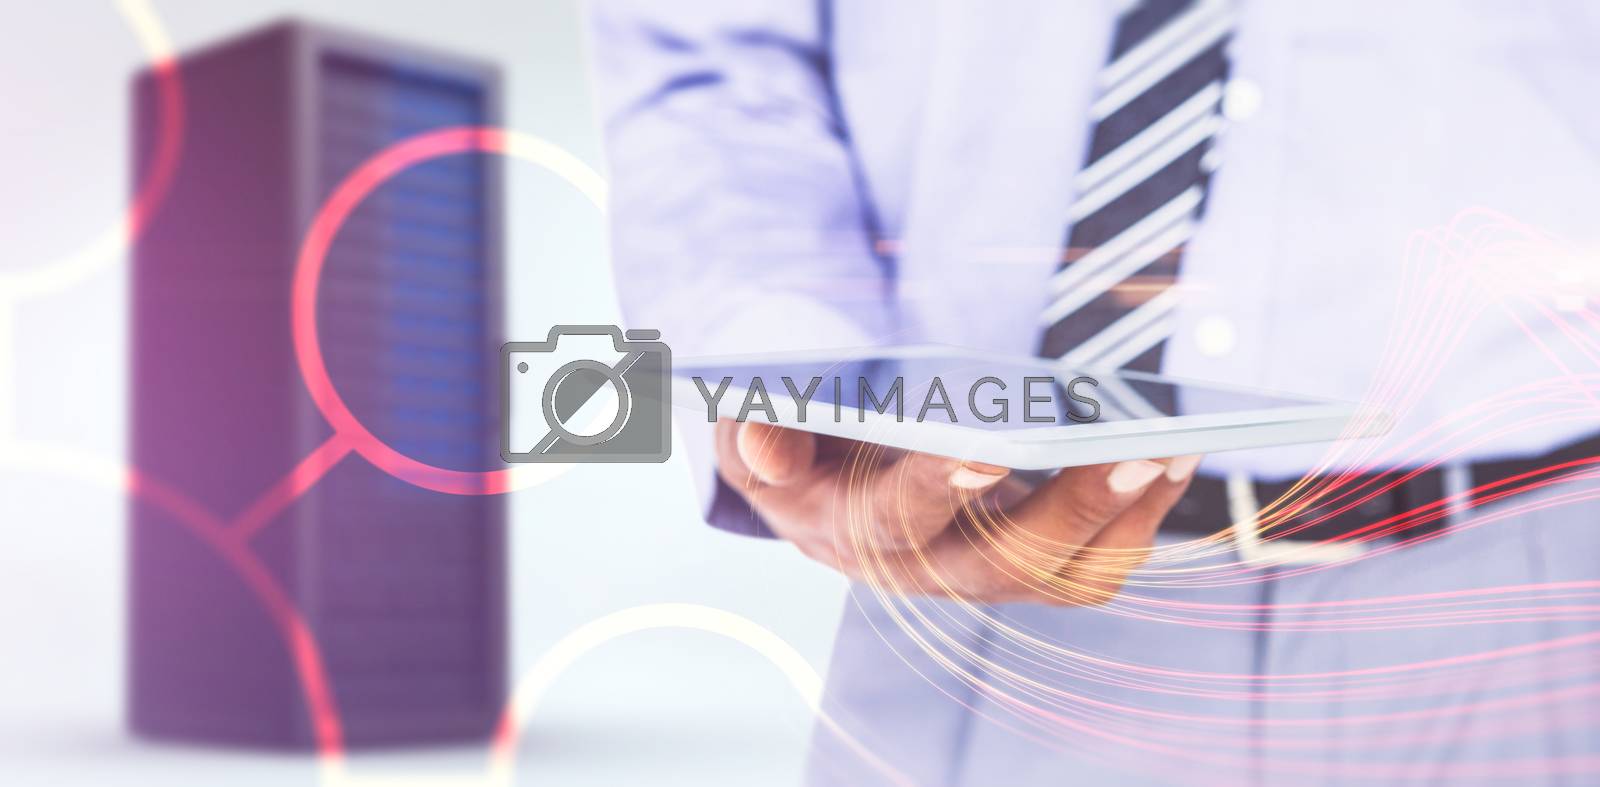 Royalty free image of Composite image of  close up view of businessman using tablet computer by Wavebreakmedia